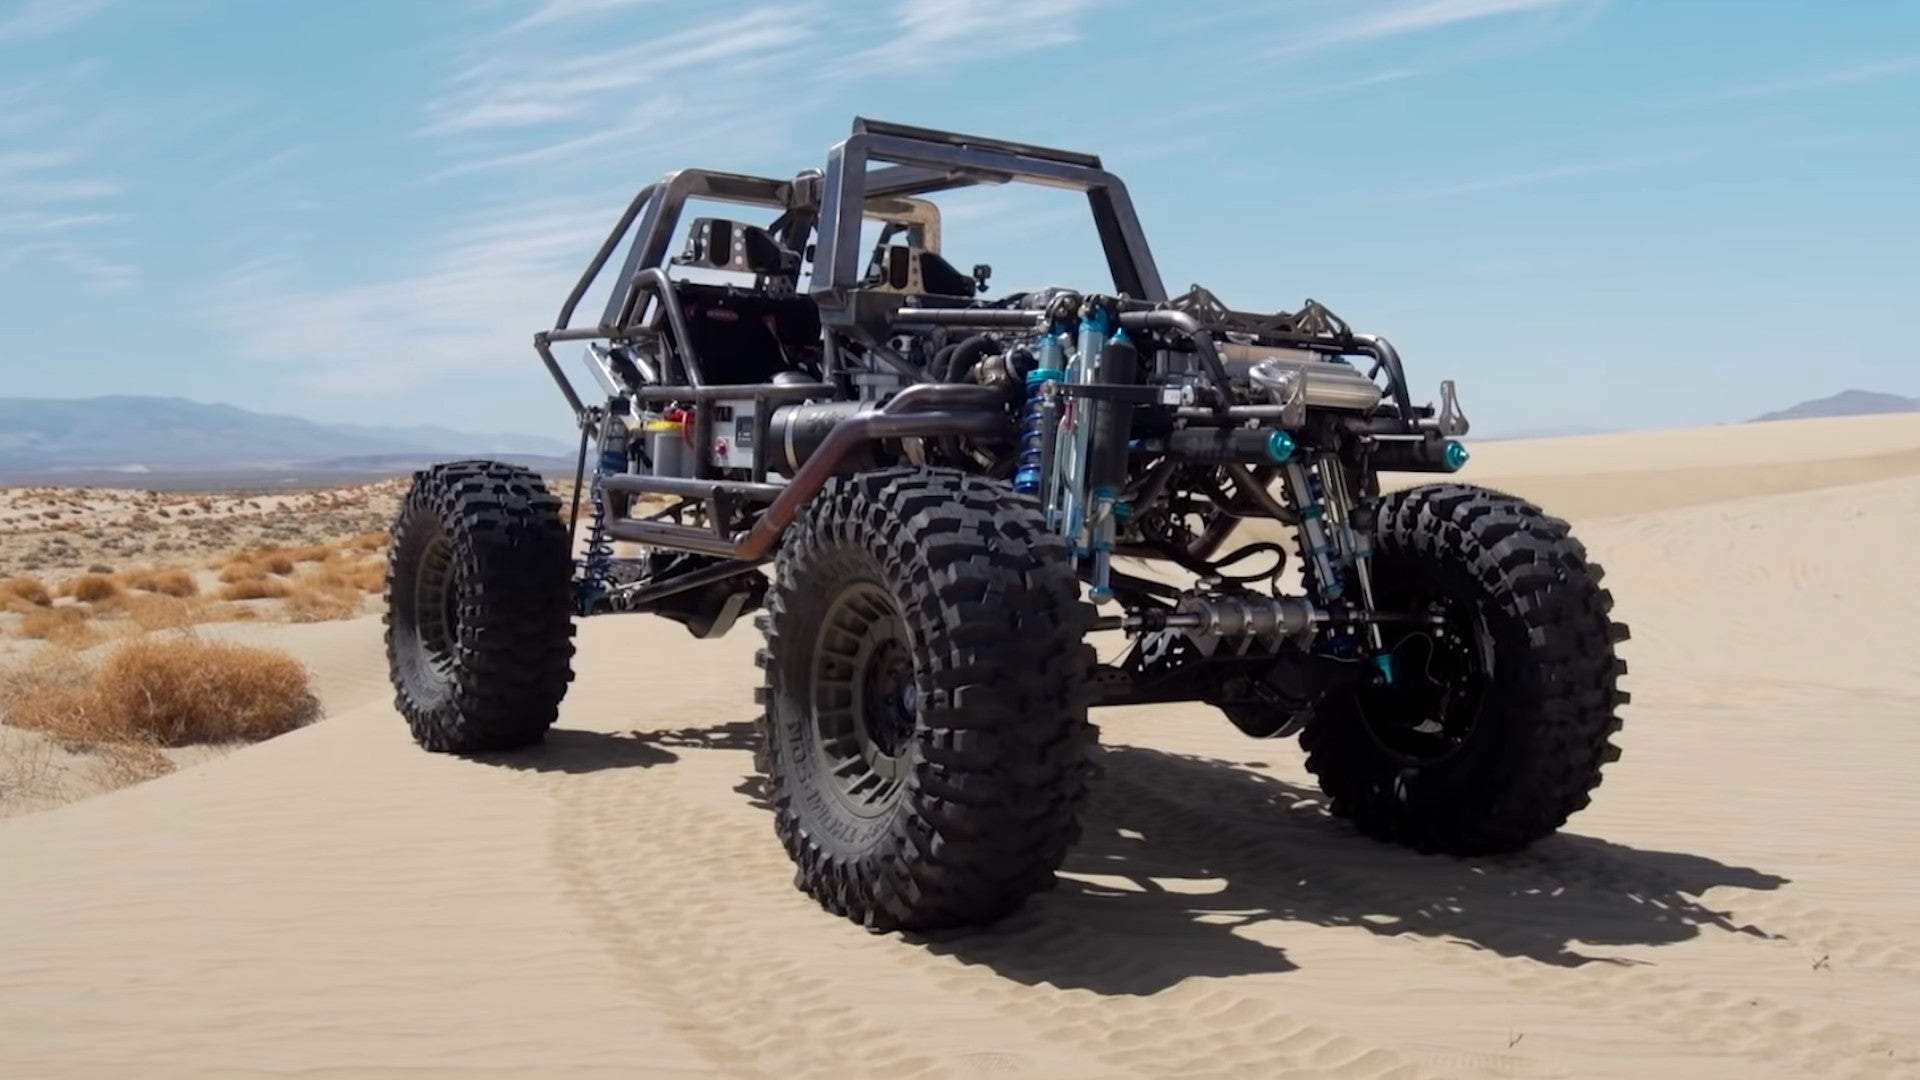 Hoonigan’s 1,000 HP Warthog Hits the Sand In First Off-Road Test